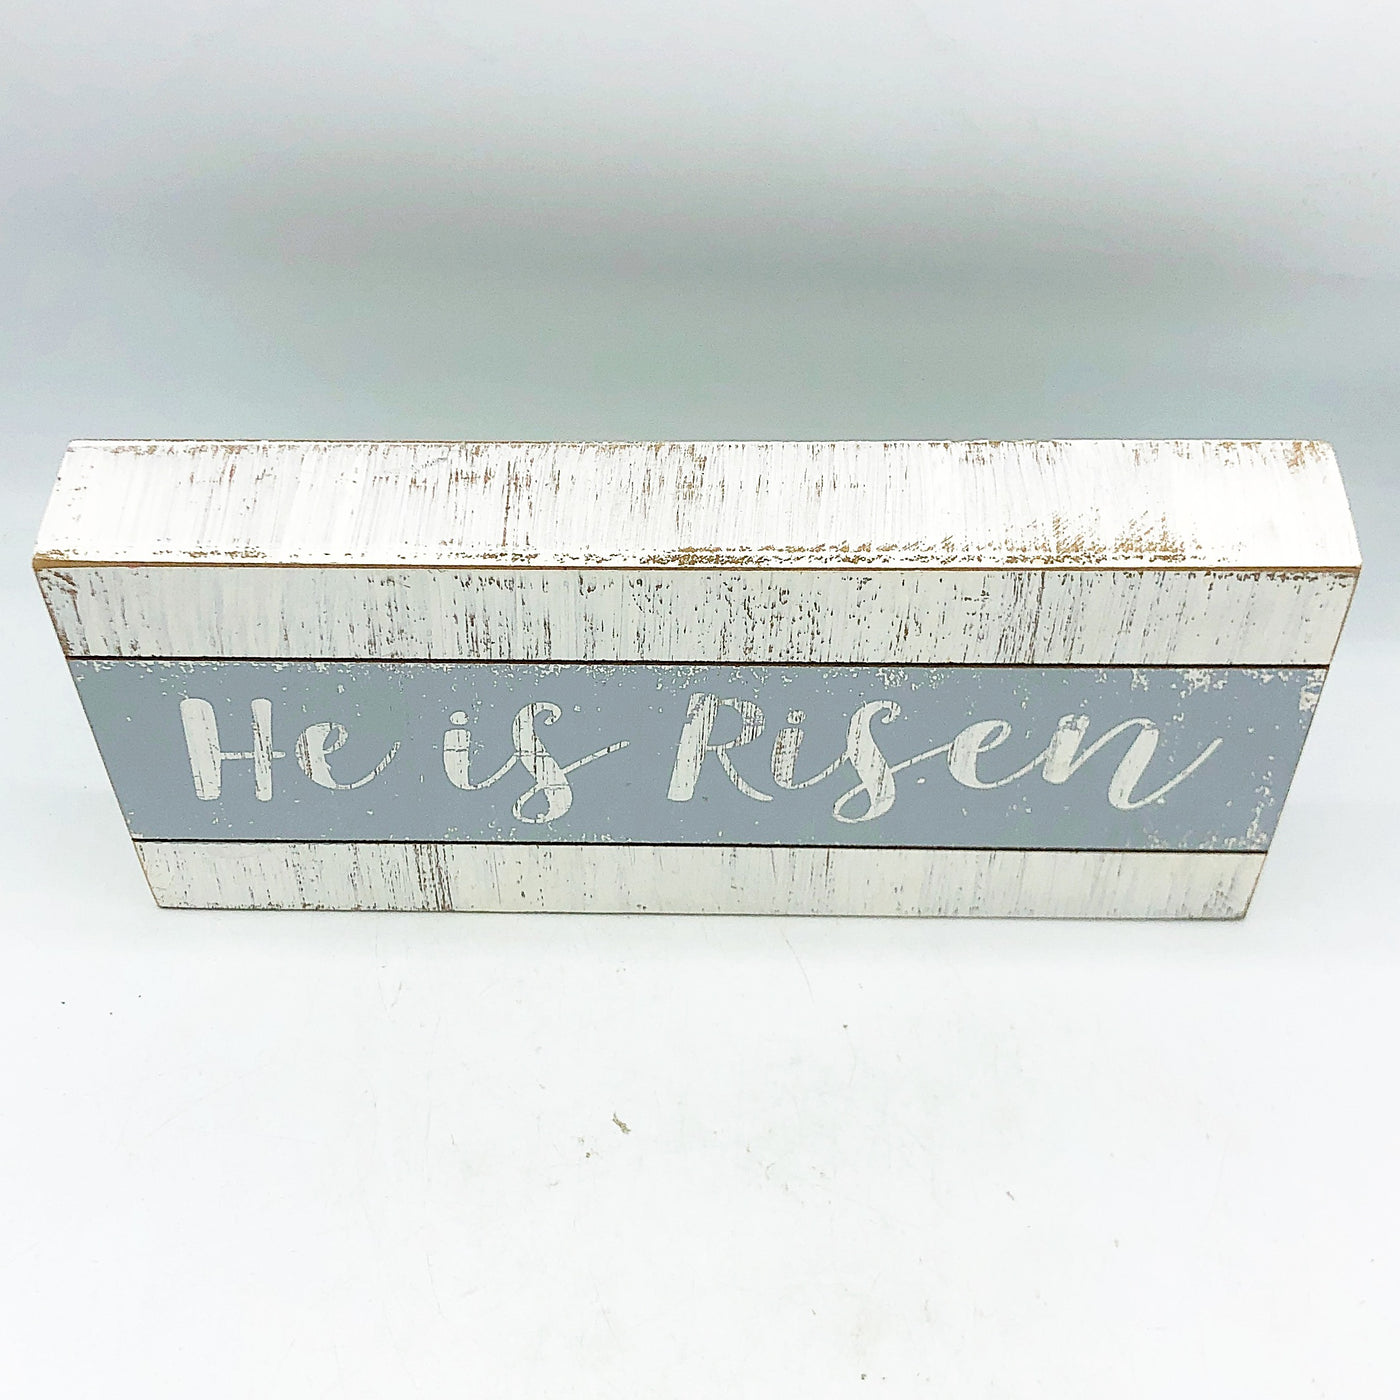 💙 He is Risen 11" Distressed Pallet Box Sign